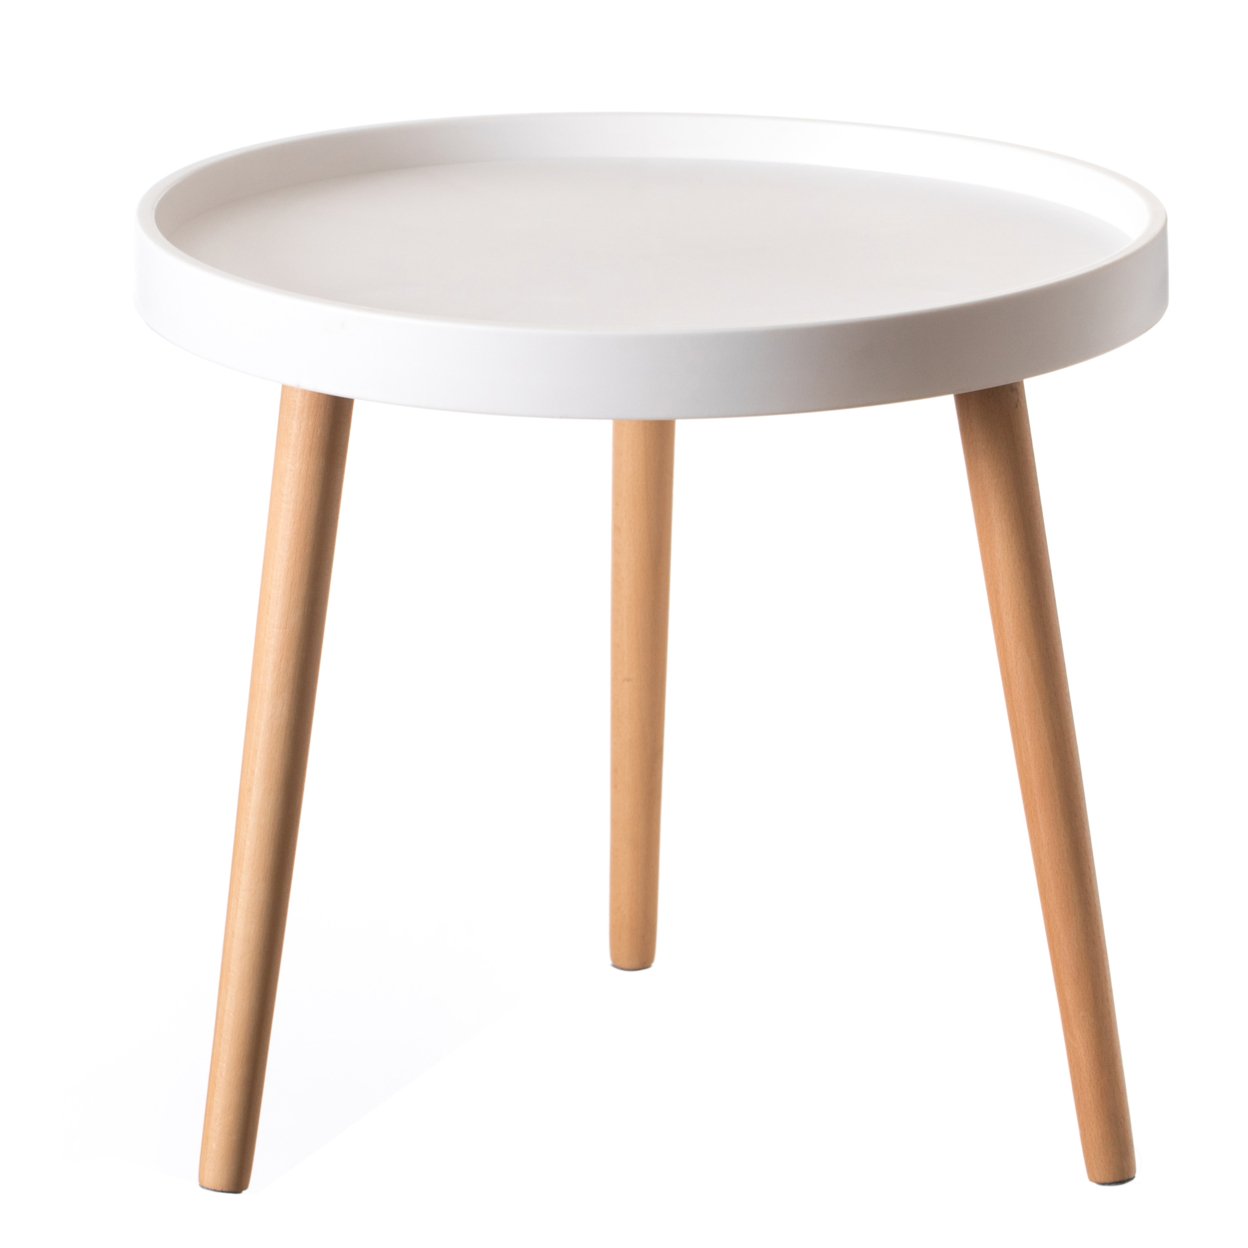 Modern Plastic Round Side Table Accent Coffee Table With Beech Wood Legs - White